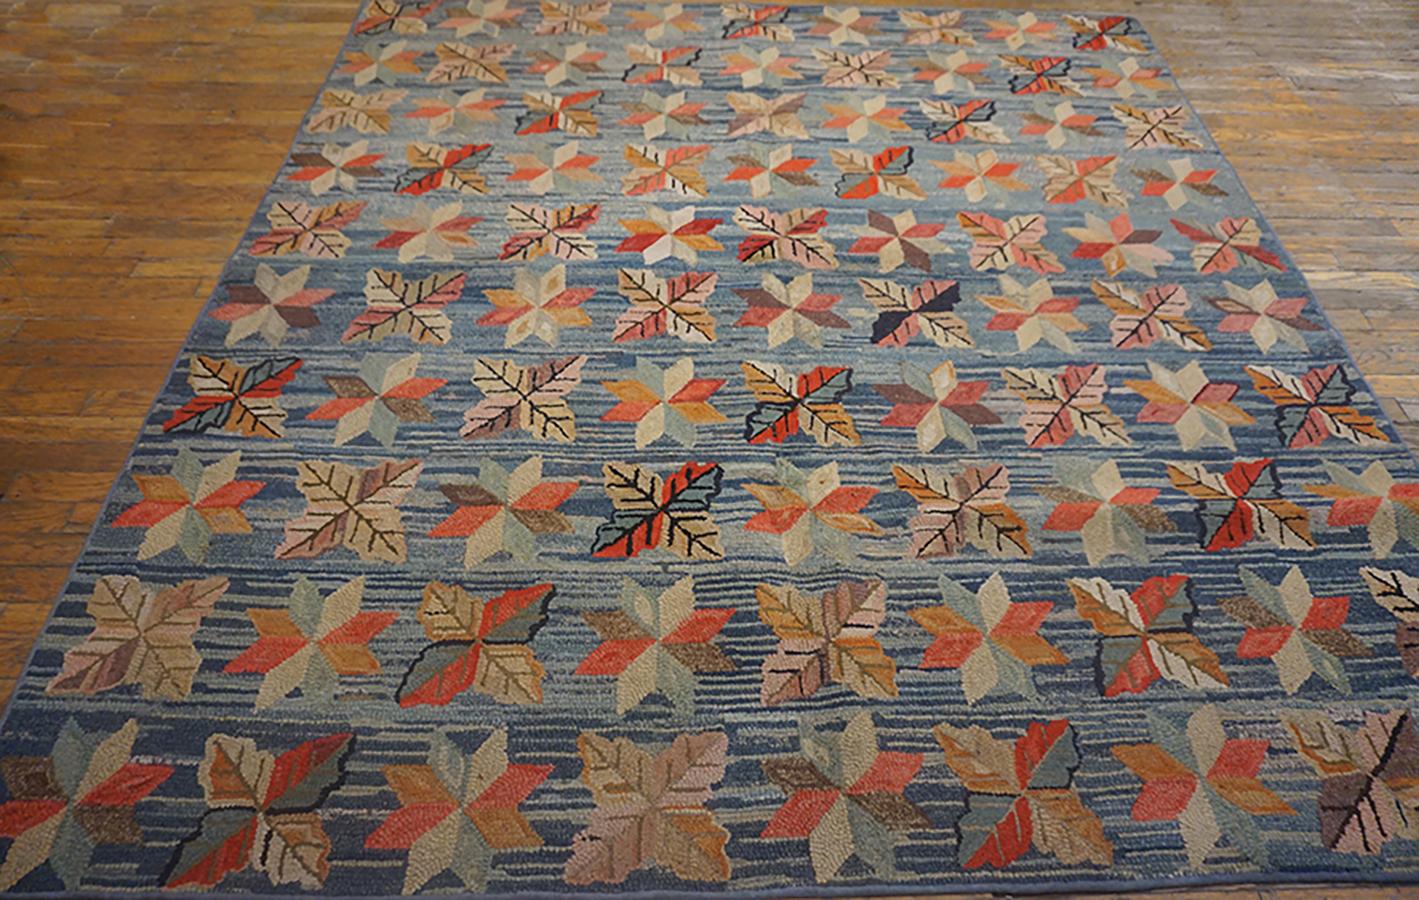 Late 19th Century American Hooked Rug, Size: 6' 8